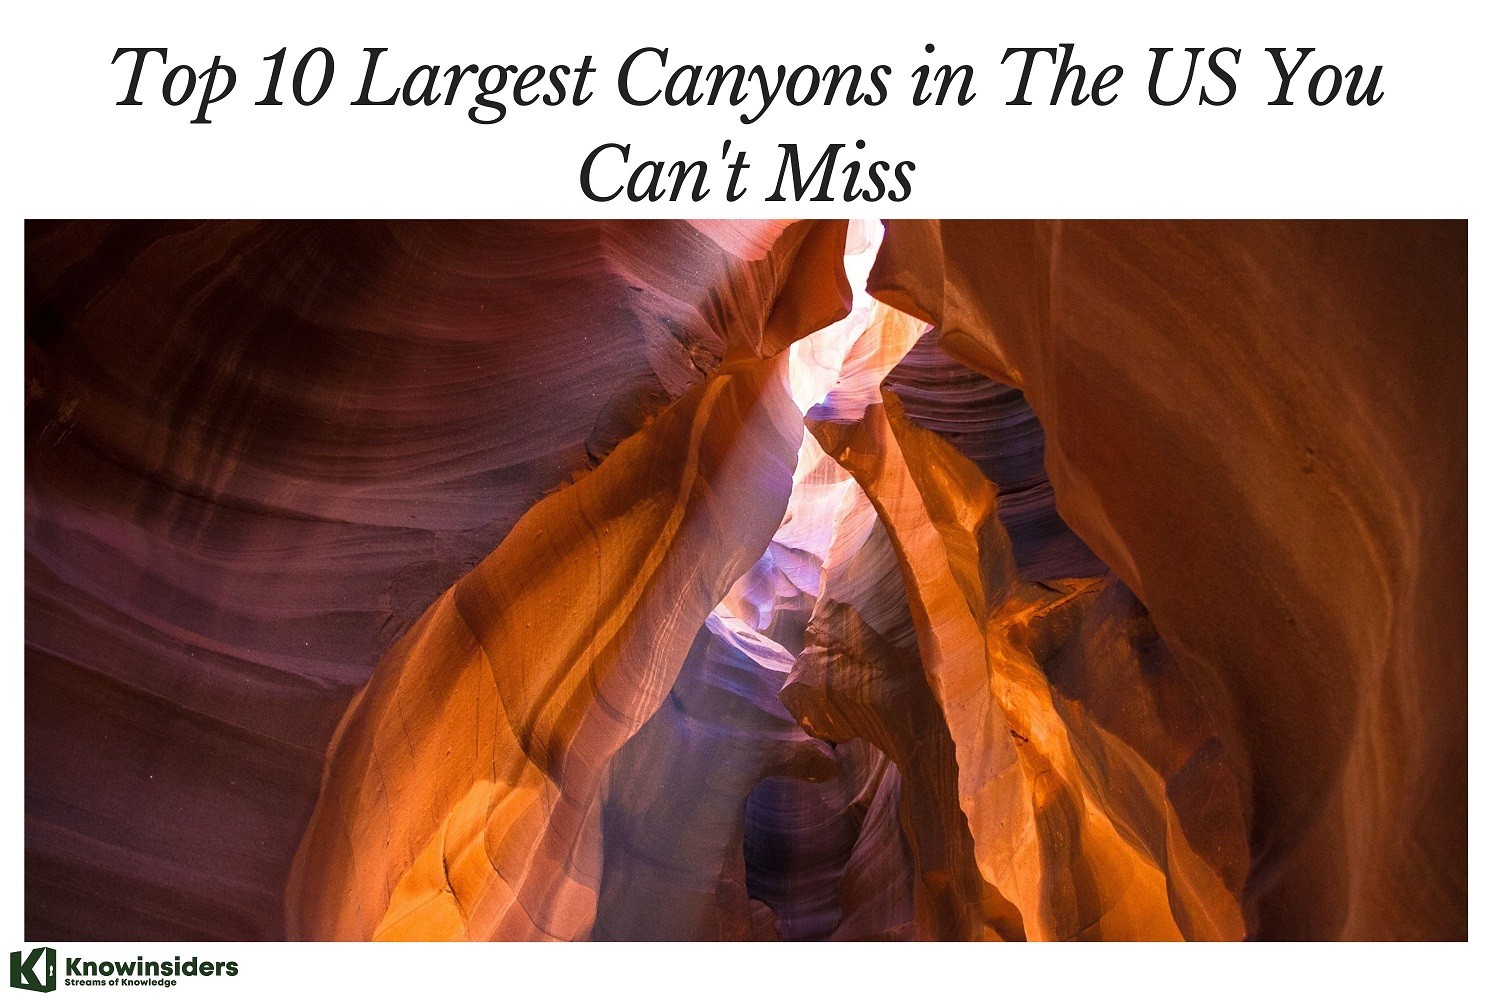 Top 10 Largest Canyons in the US You Can't Miss